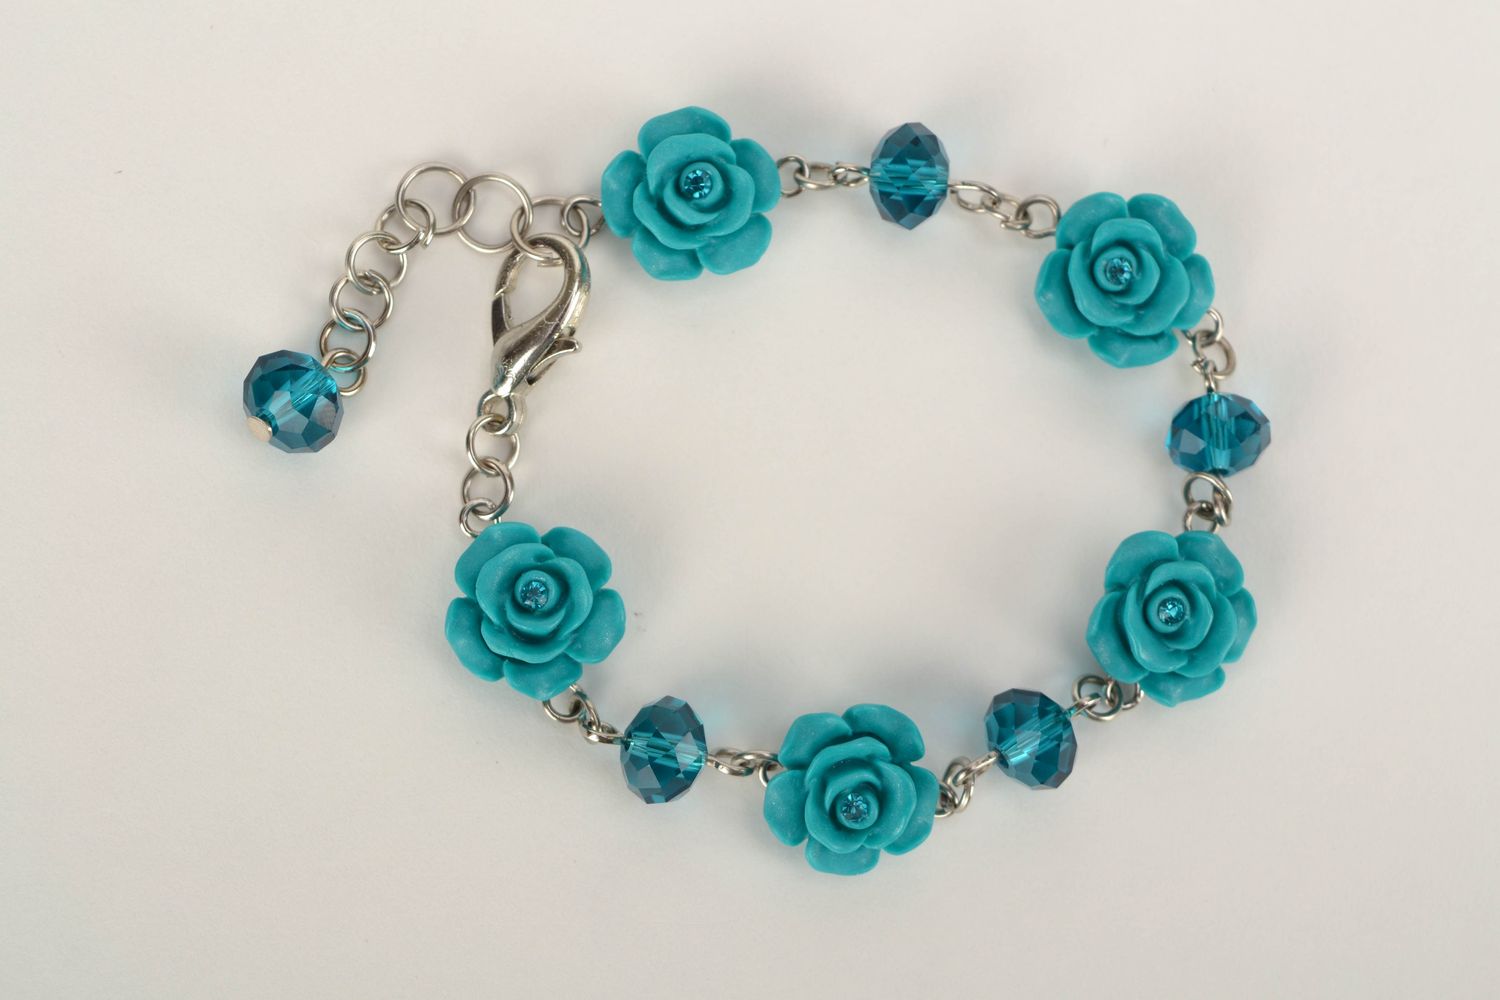 Polymer clay wrist bracelet with blue roses photo 3